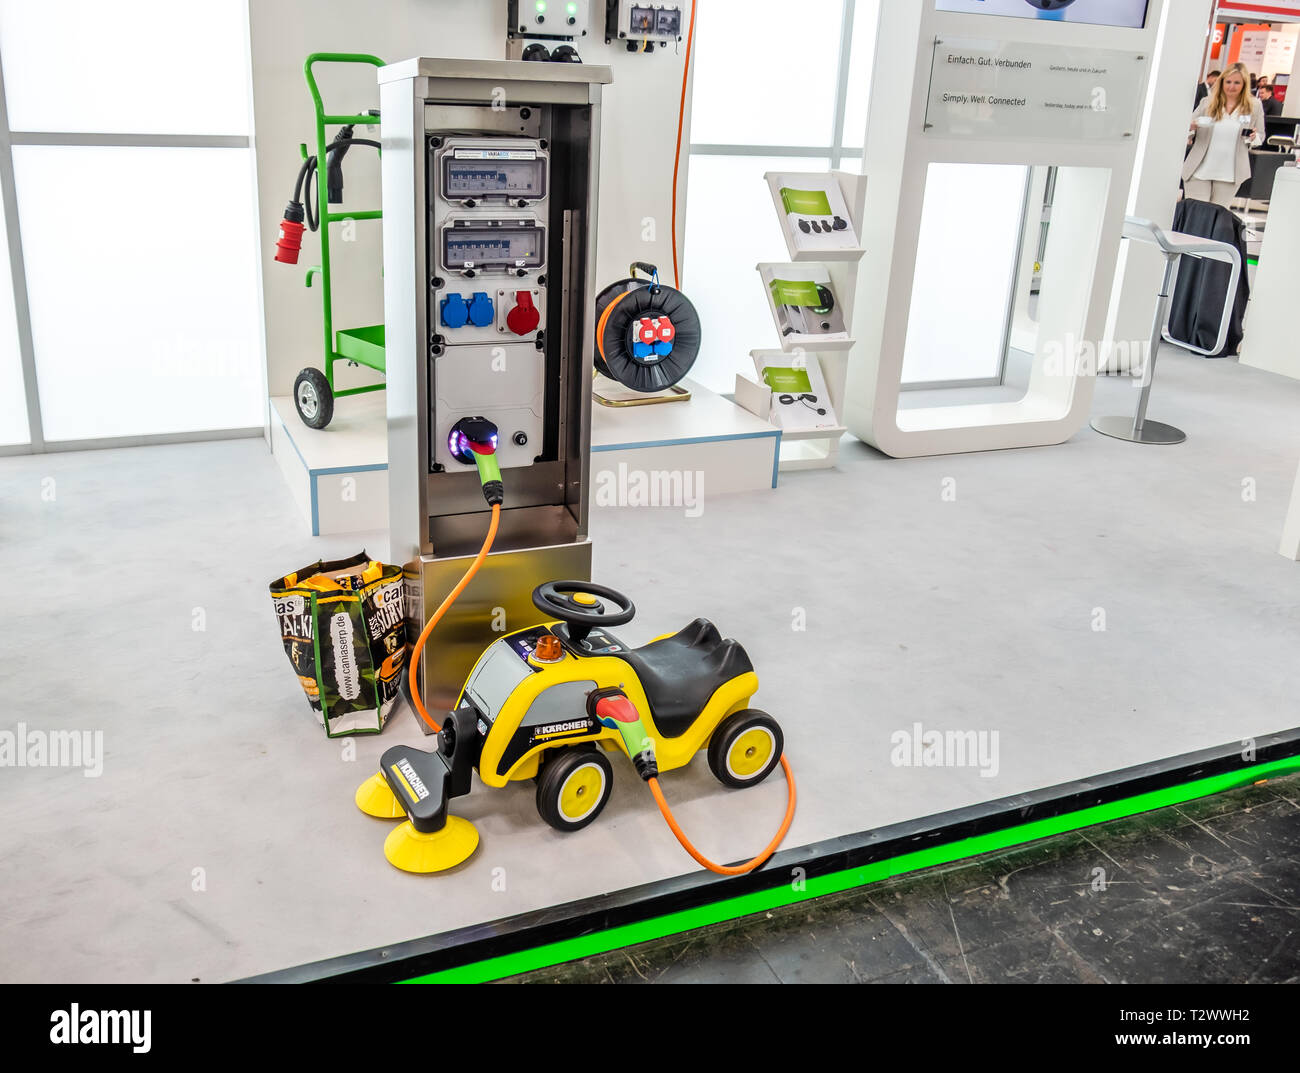 HANNOVER / GERMANY - APRIL 02 2019 : The newest e-mobility charging technology is presented at the fair in Hannover. Stock Photo